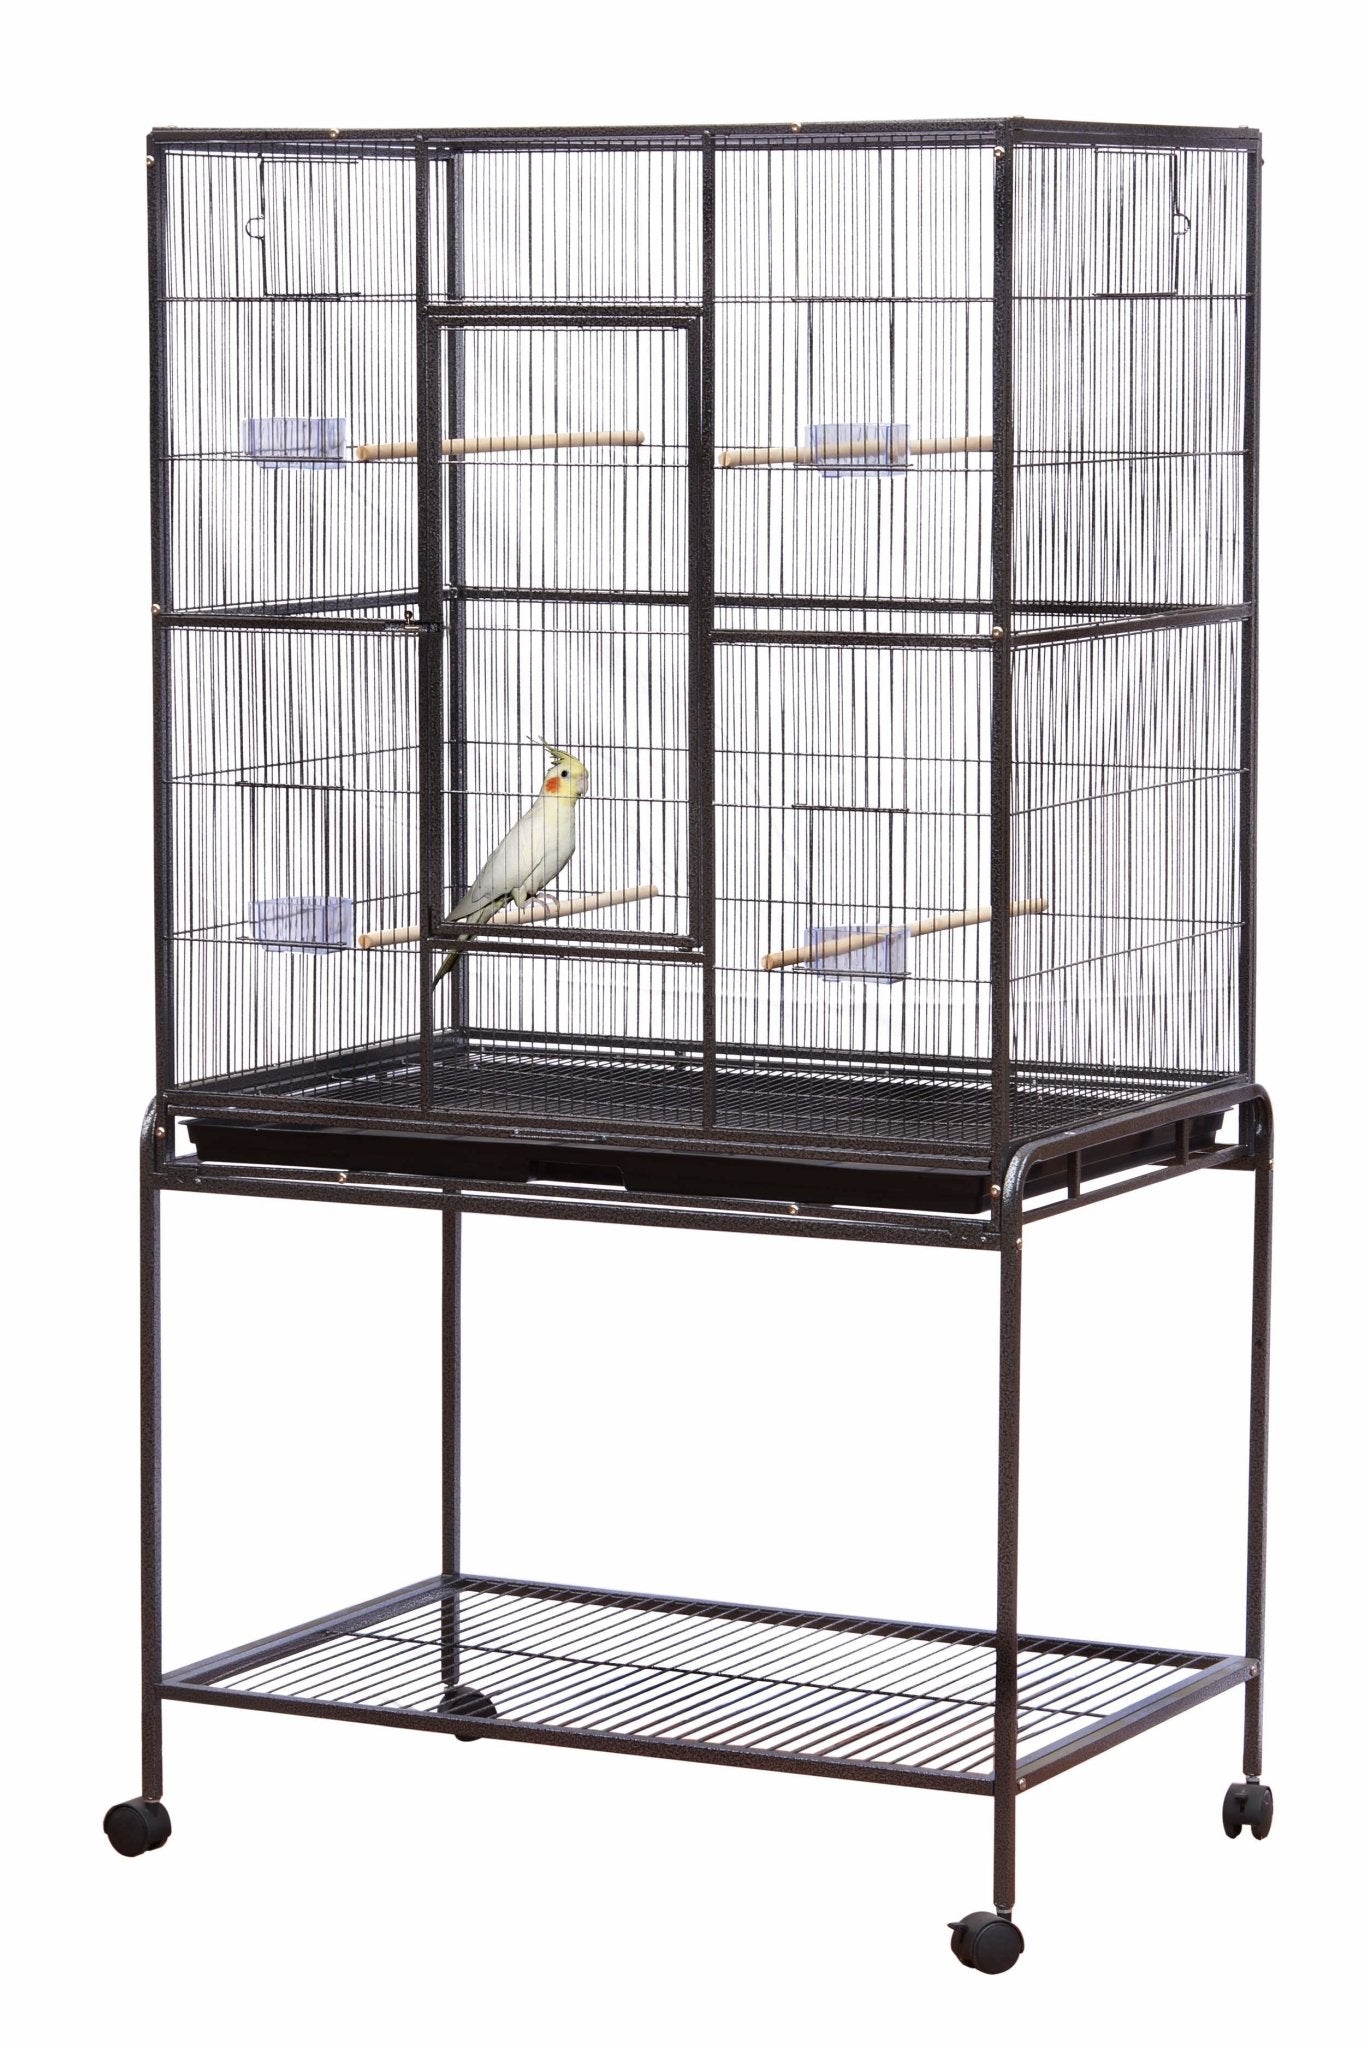 Bono Fido Deluxe Flight Cage with Stand 45433 30'' - Woonona Petfood & Produce